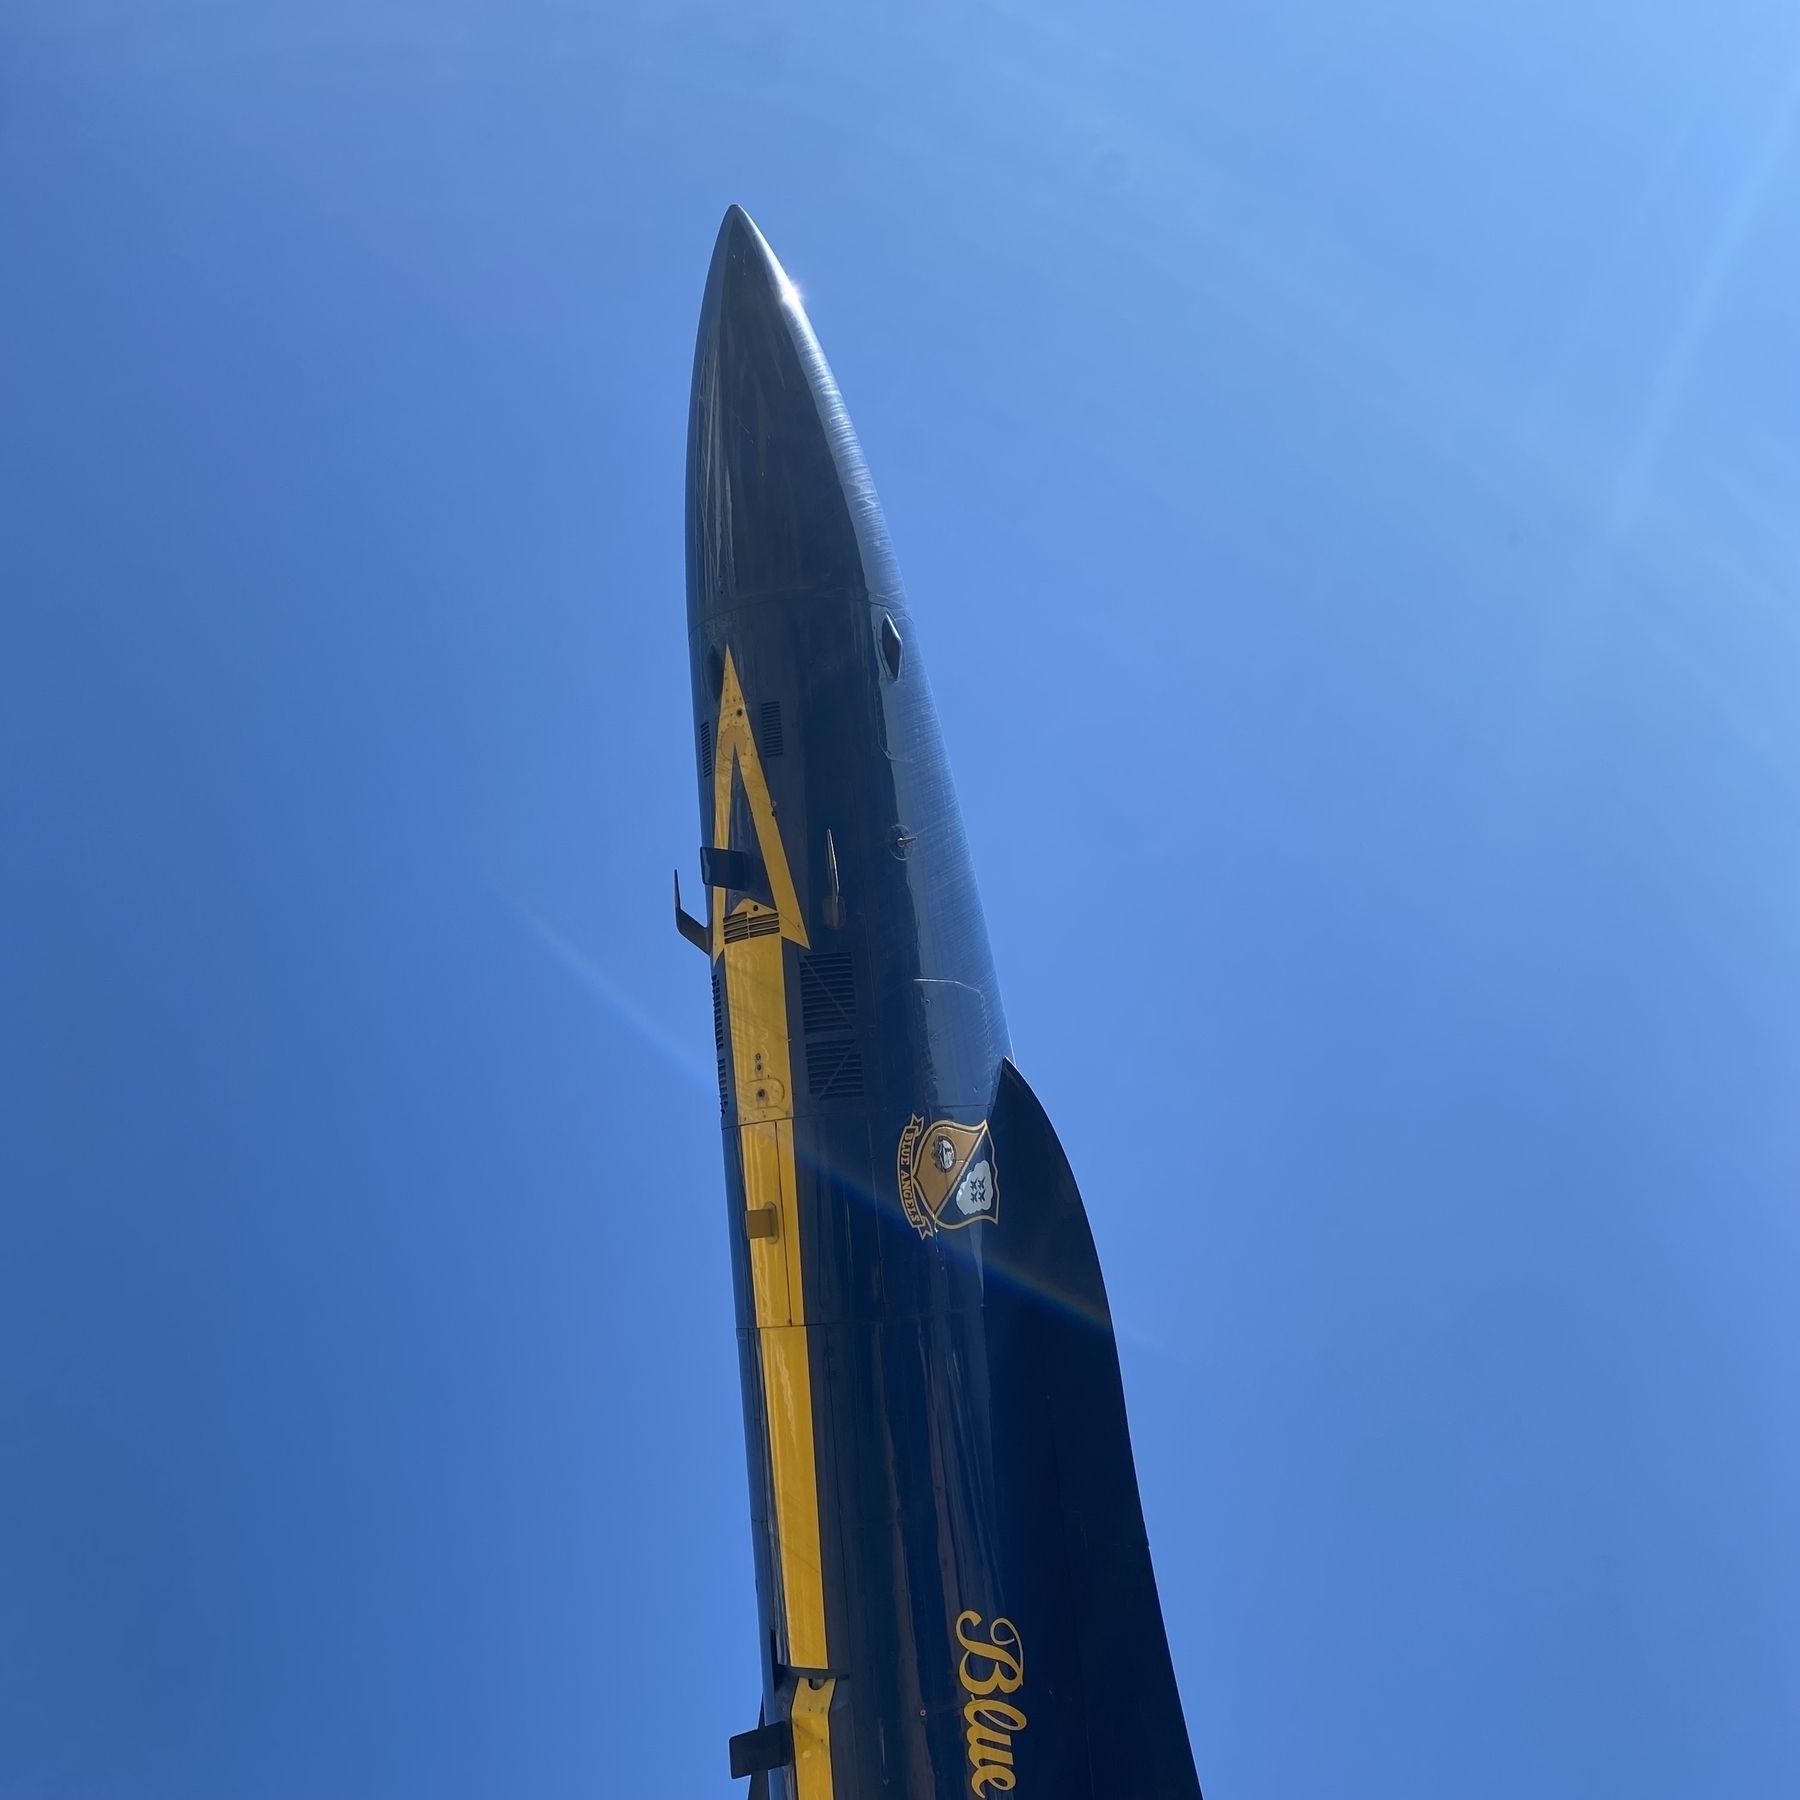 The front portion of an F18 fighter jet in Blue Angels livery against a blue sky.